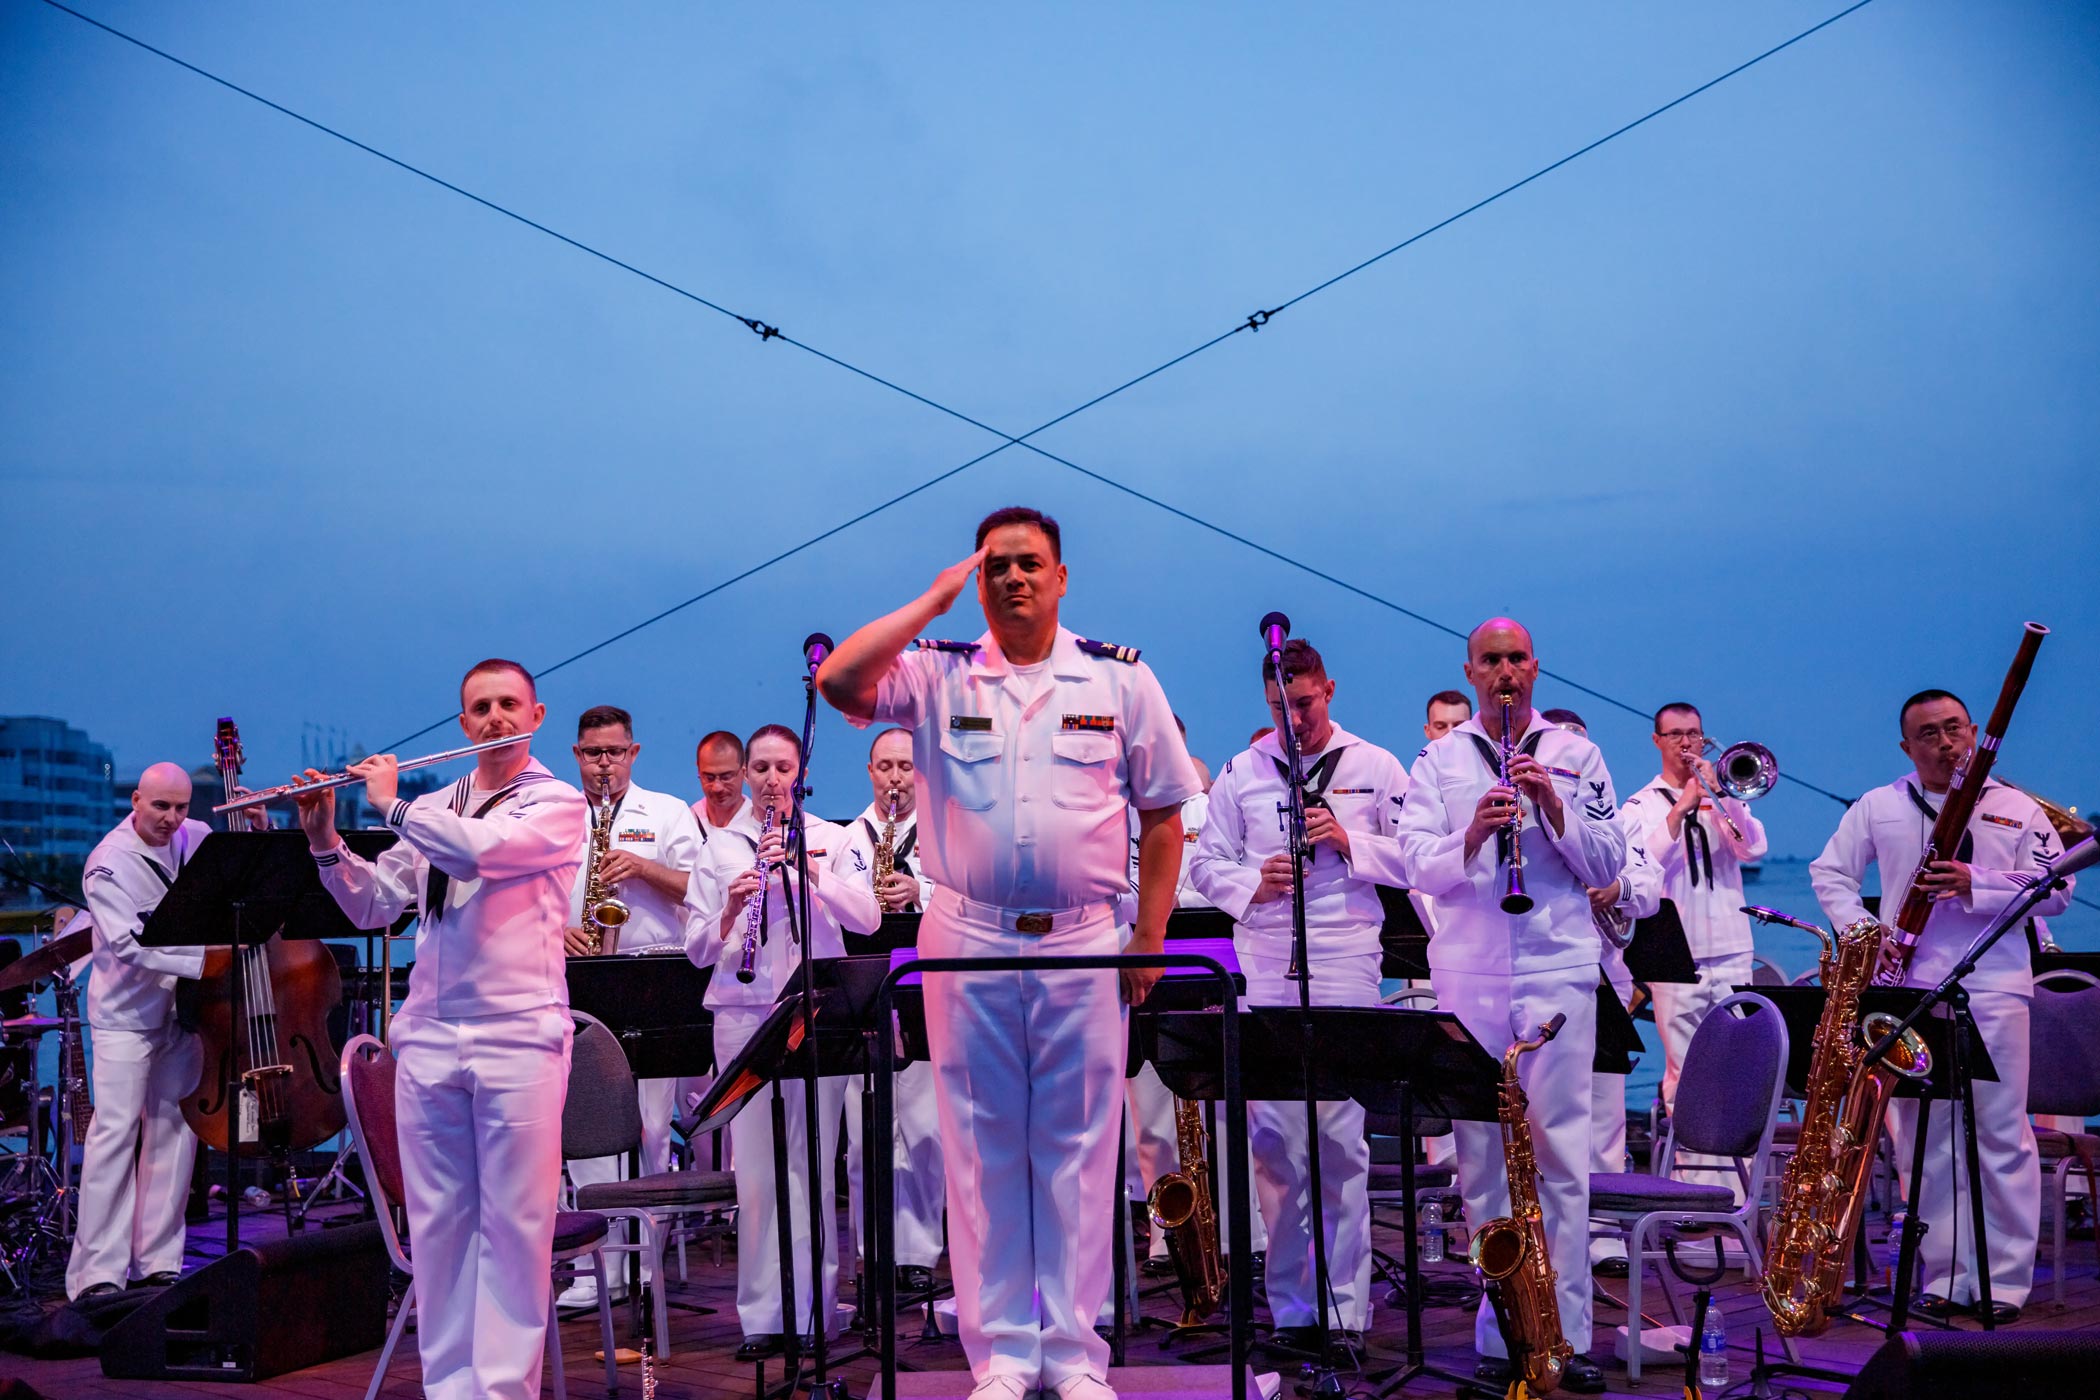 Band Director Saluting with Band at Great Lakes Navy Band Navy Pier Performance